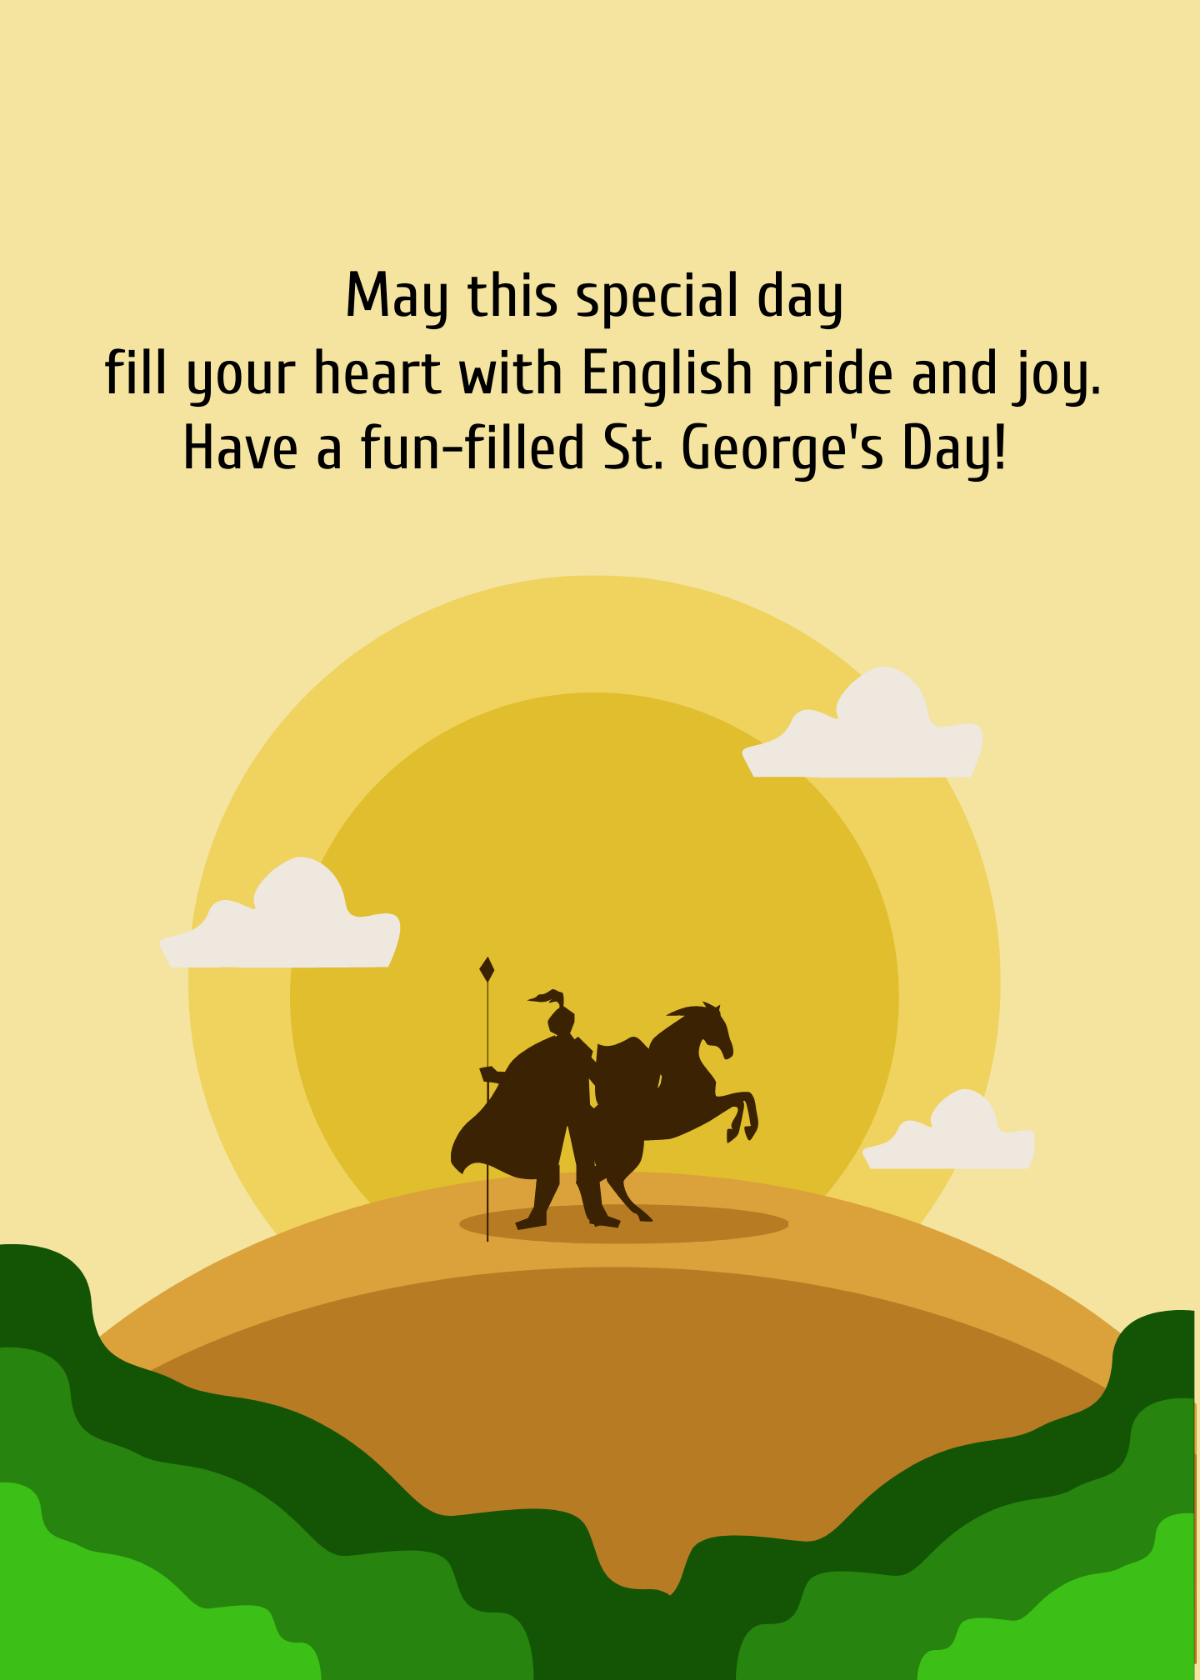 St. George's Day Greeting Card Template